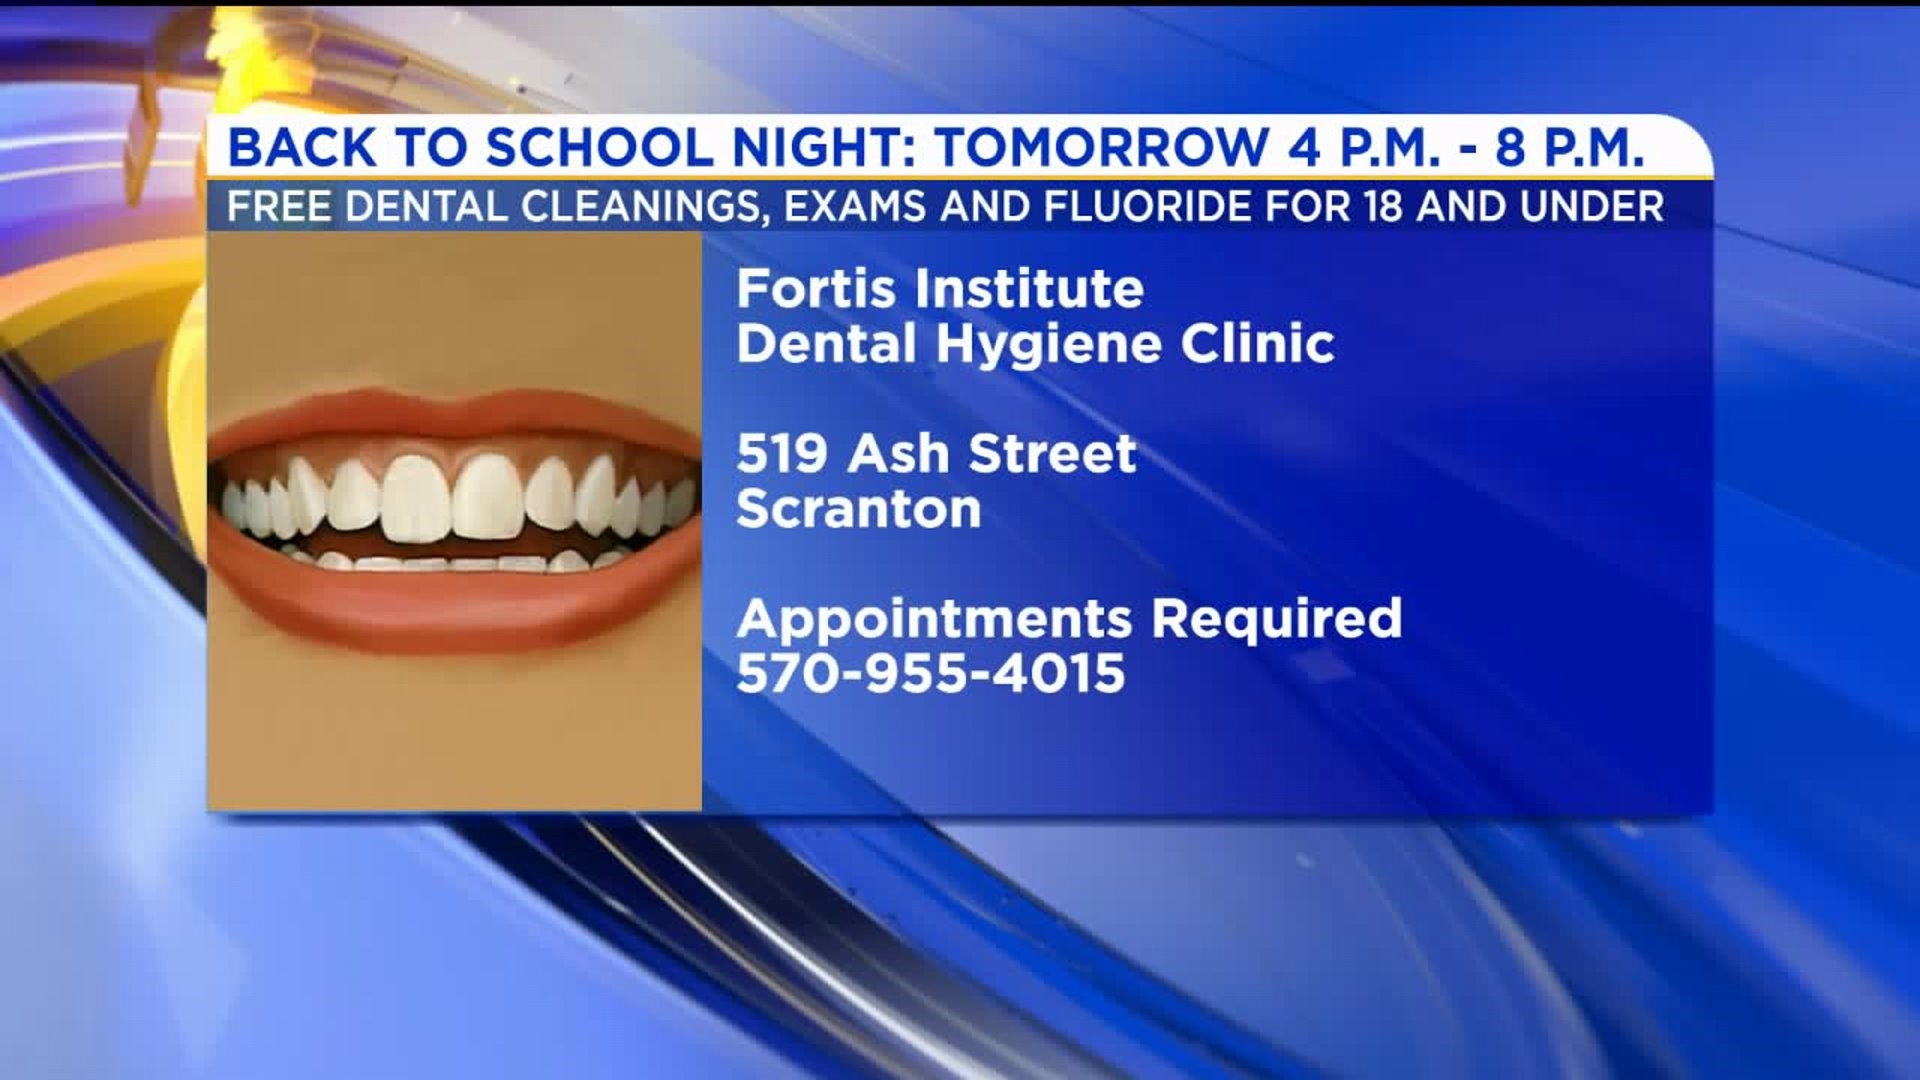 Back to School Event Offering Free Dental Care